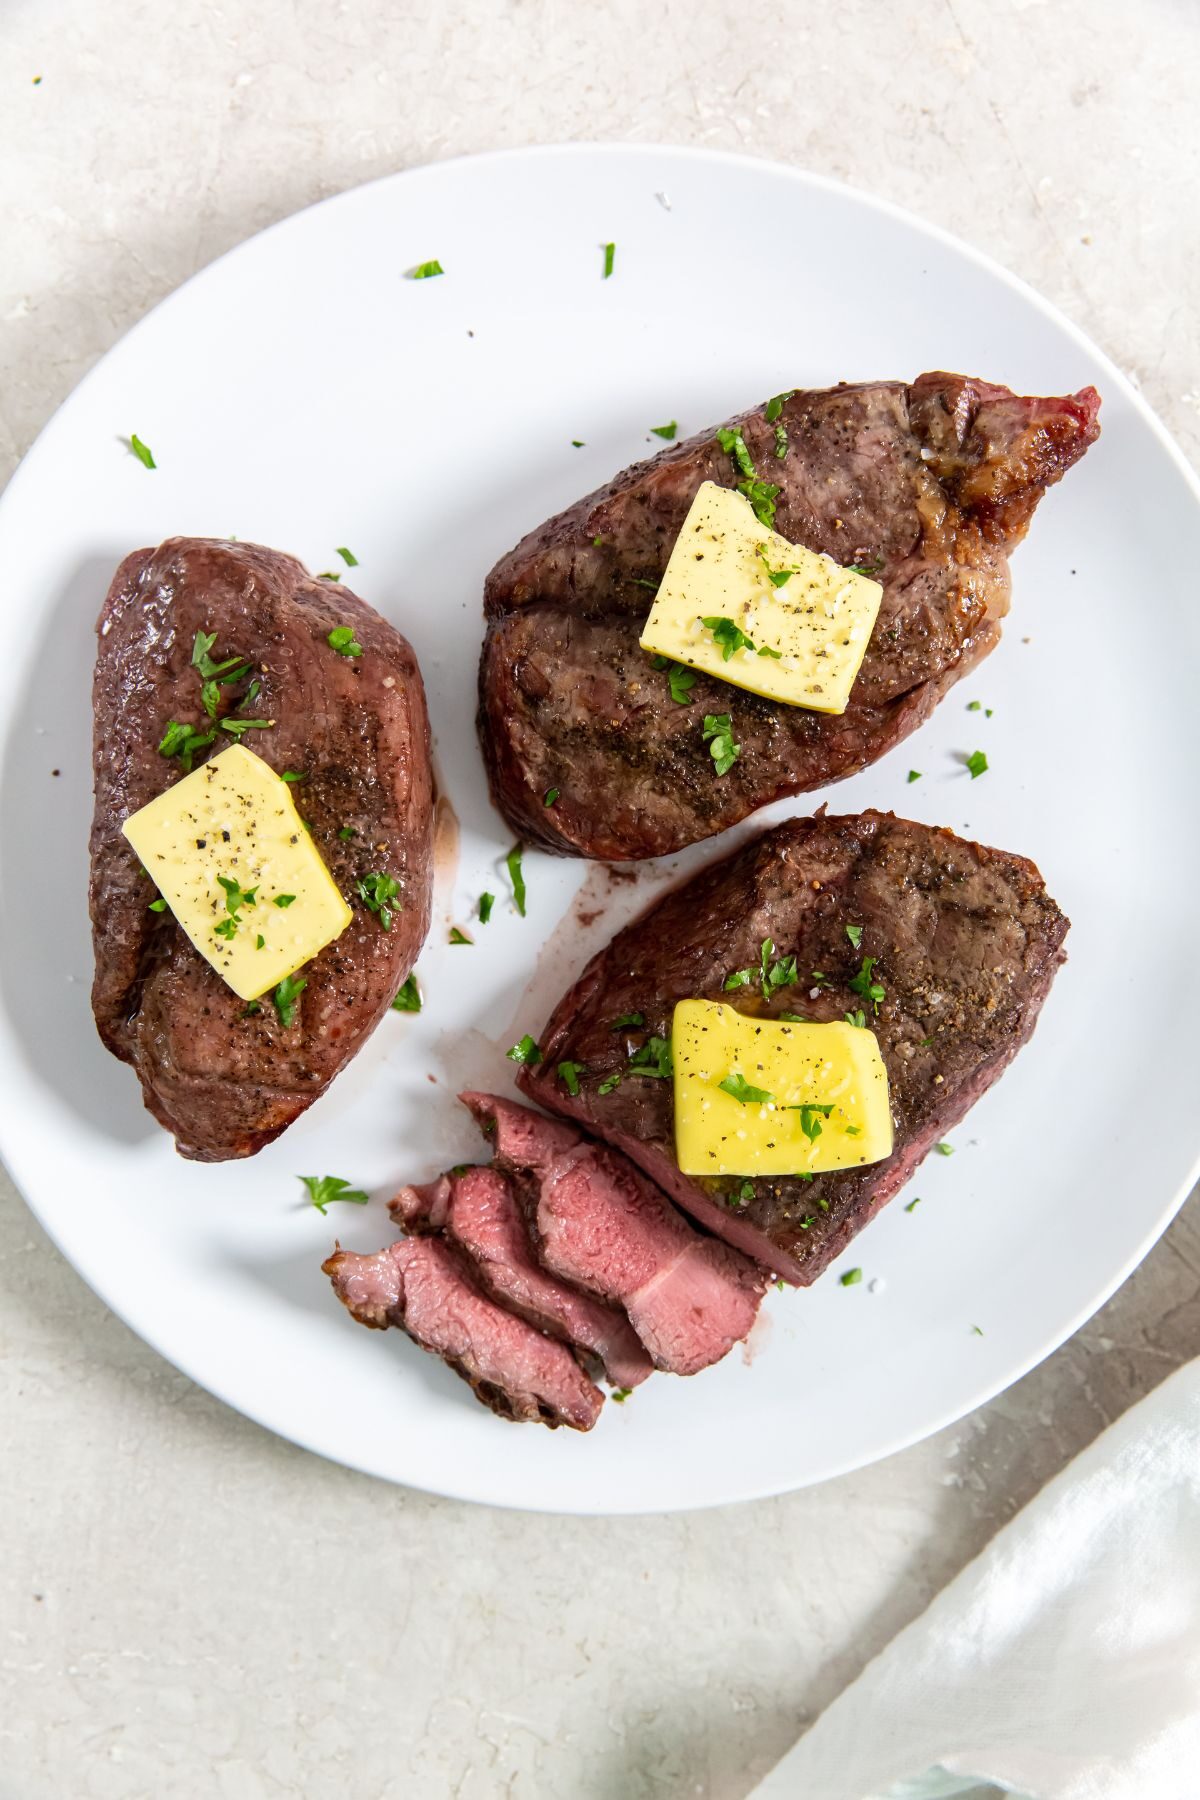 Three cooked and sliced petite sirloin steak topped with butter and herbs on a white plate.